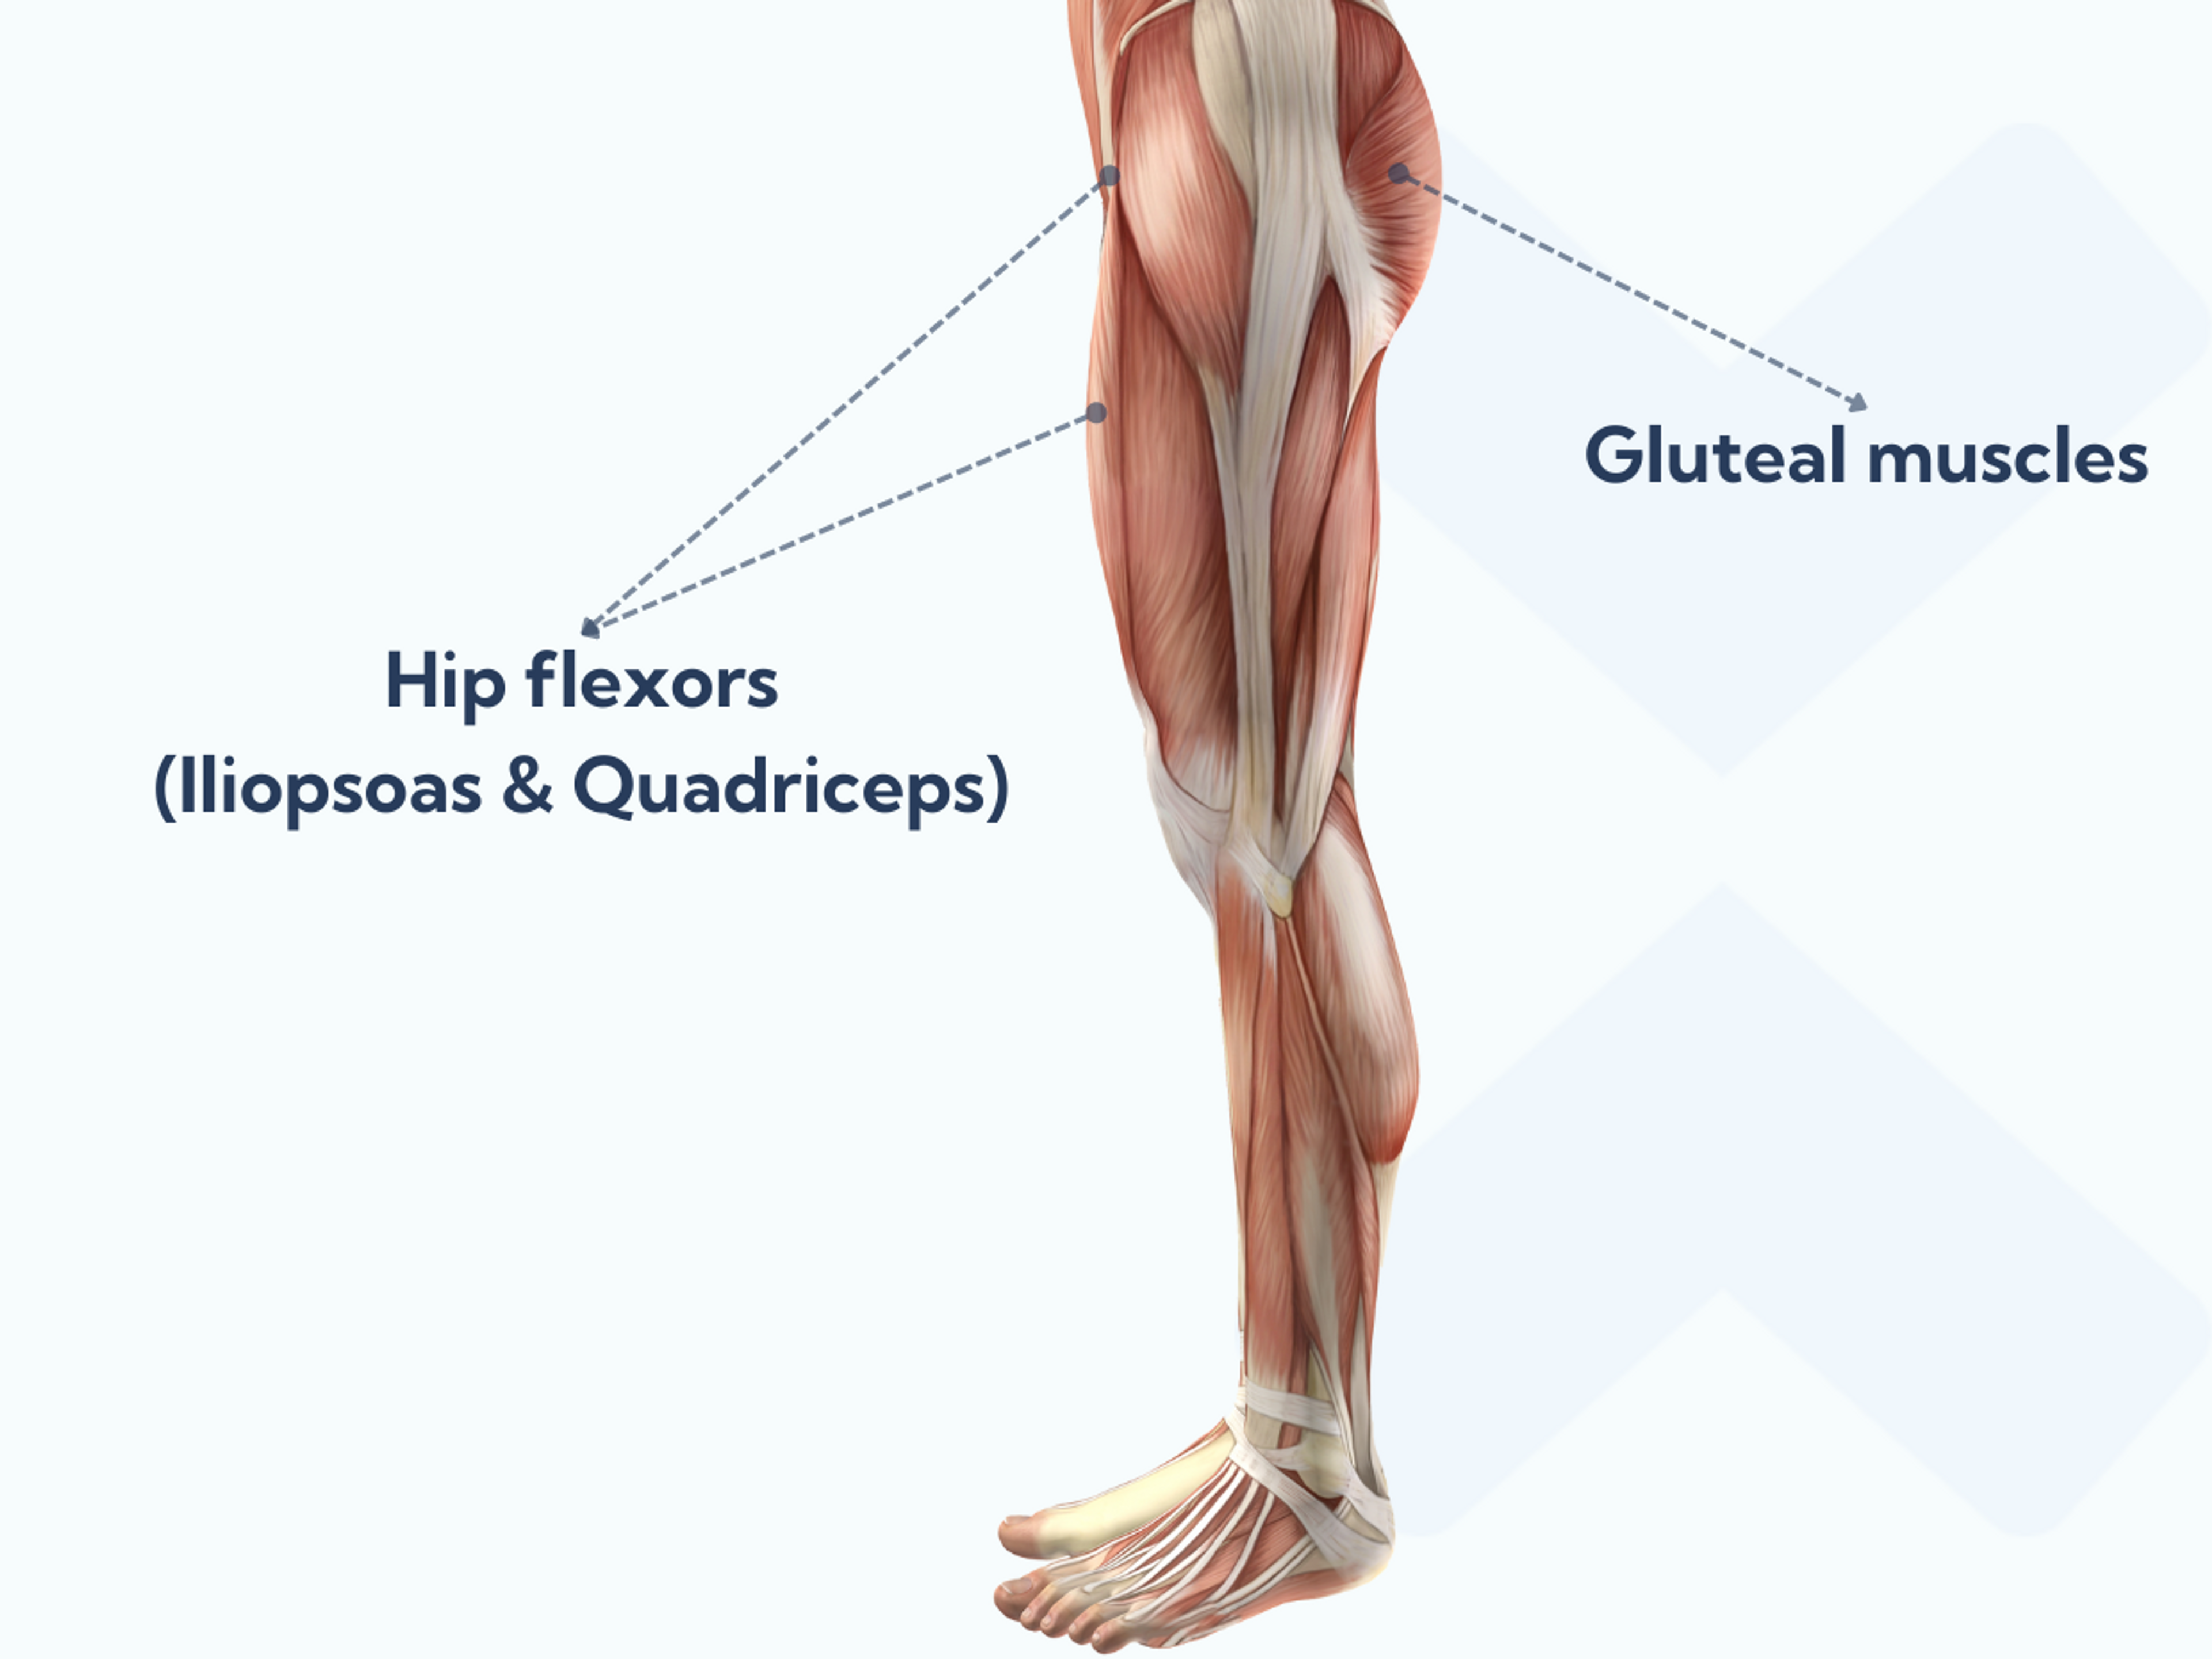 Tight hip flexor muscles may prevent the gluteal muscles from working properly.